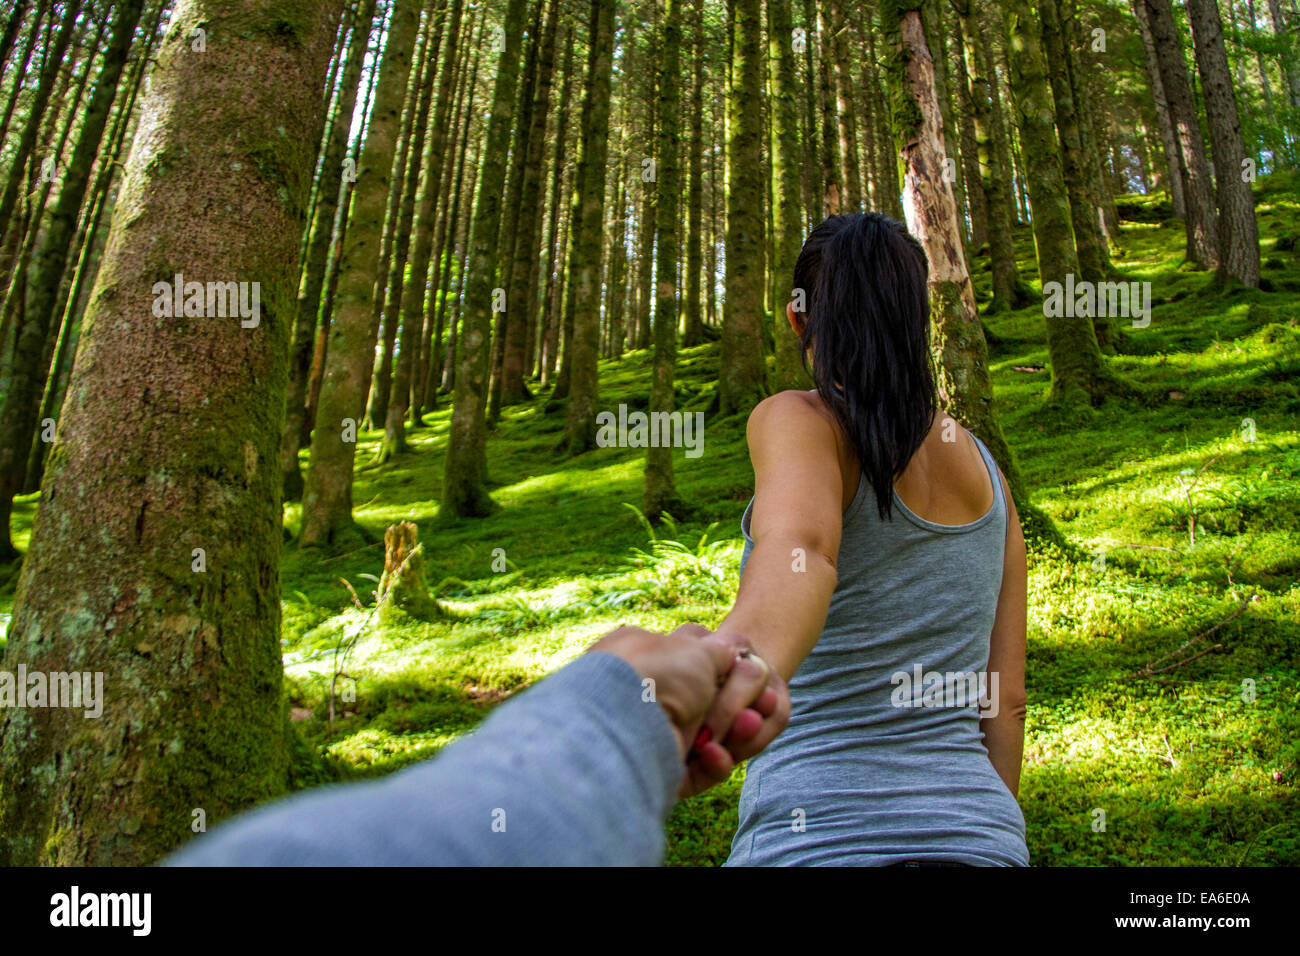 Man and woman holding hands in forest Stock Photo